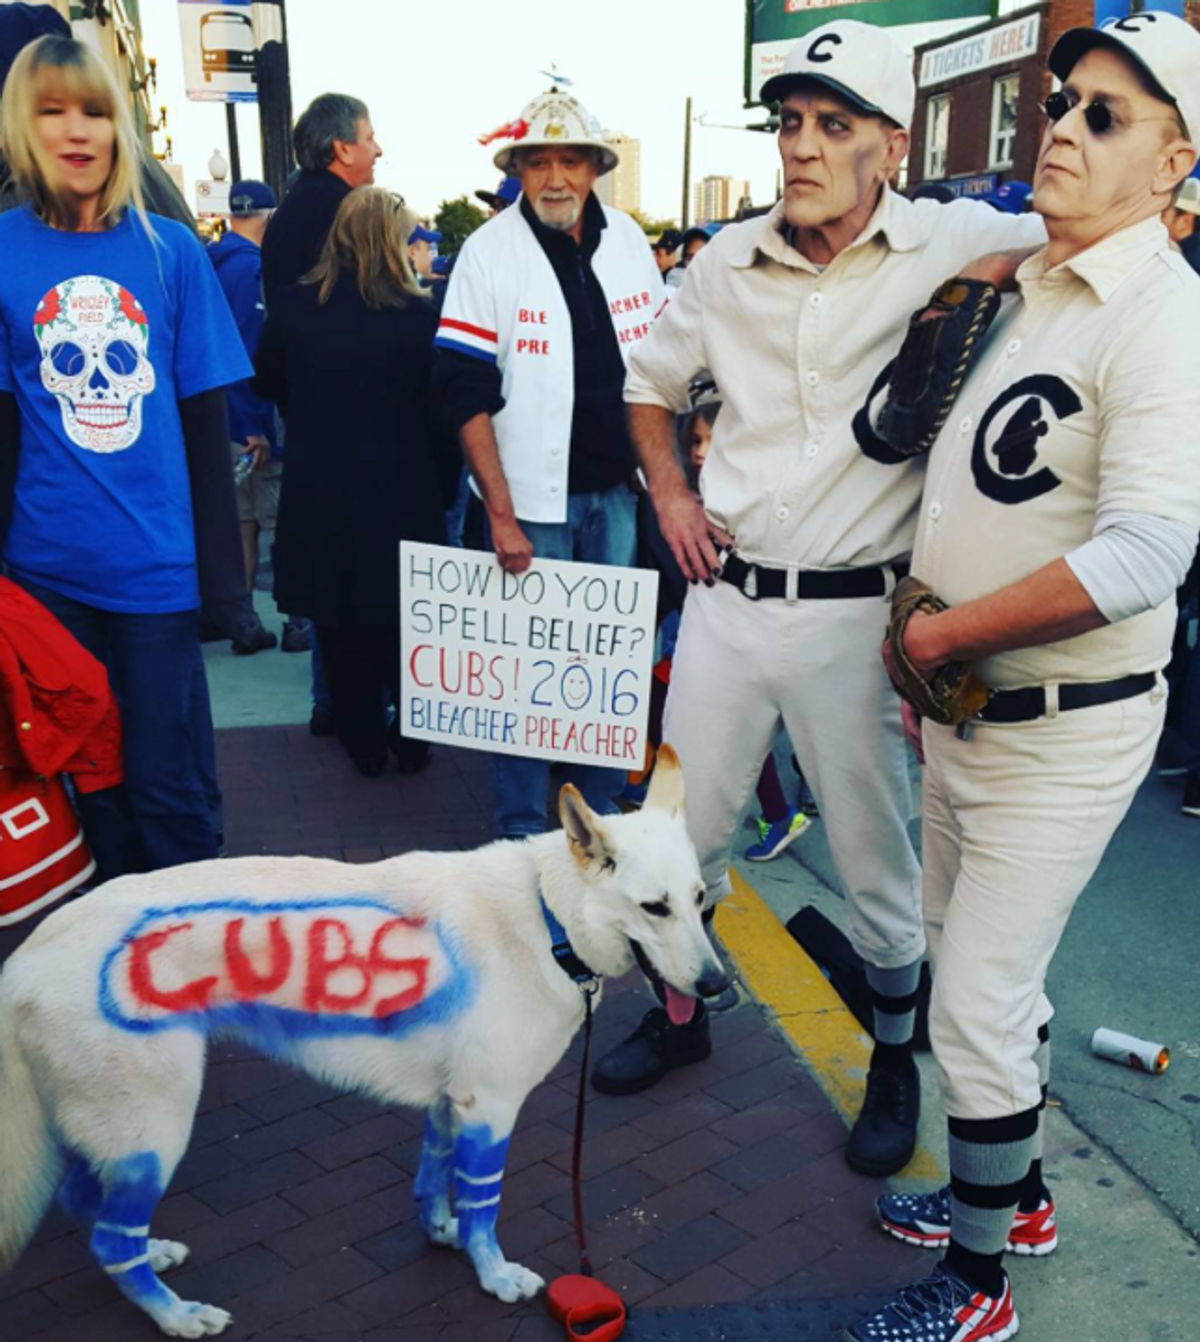 Cubs Fans Are Hyped  And There's Nothing You Can Do About It